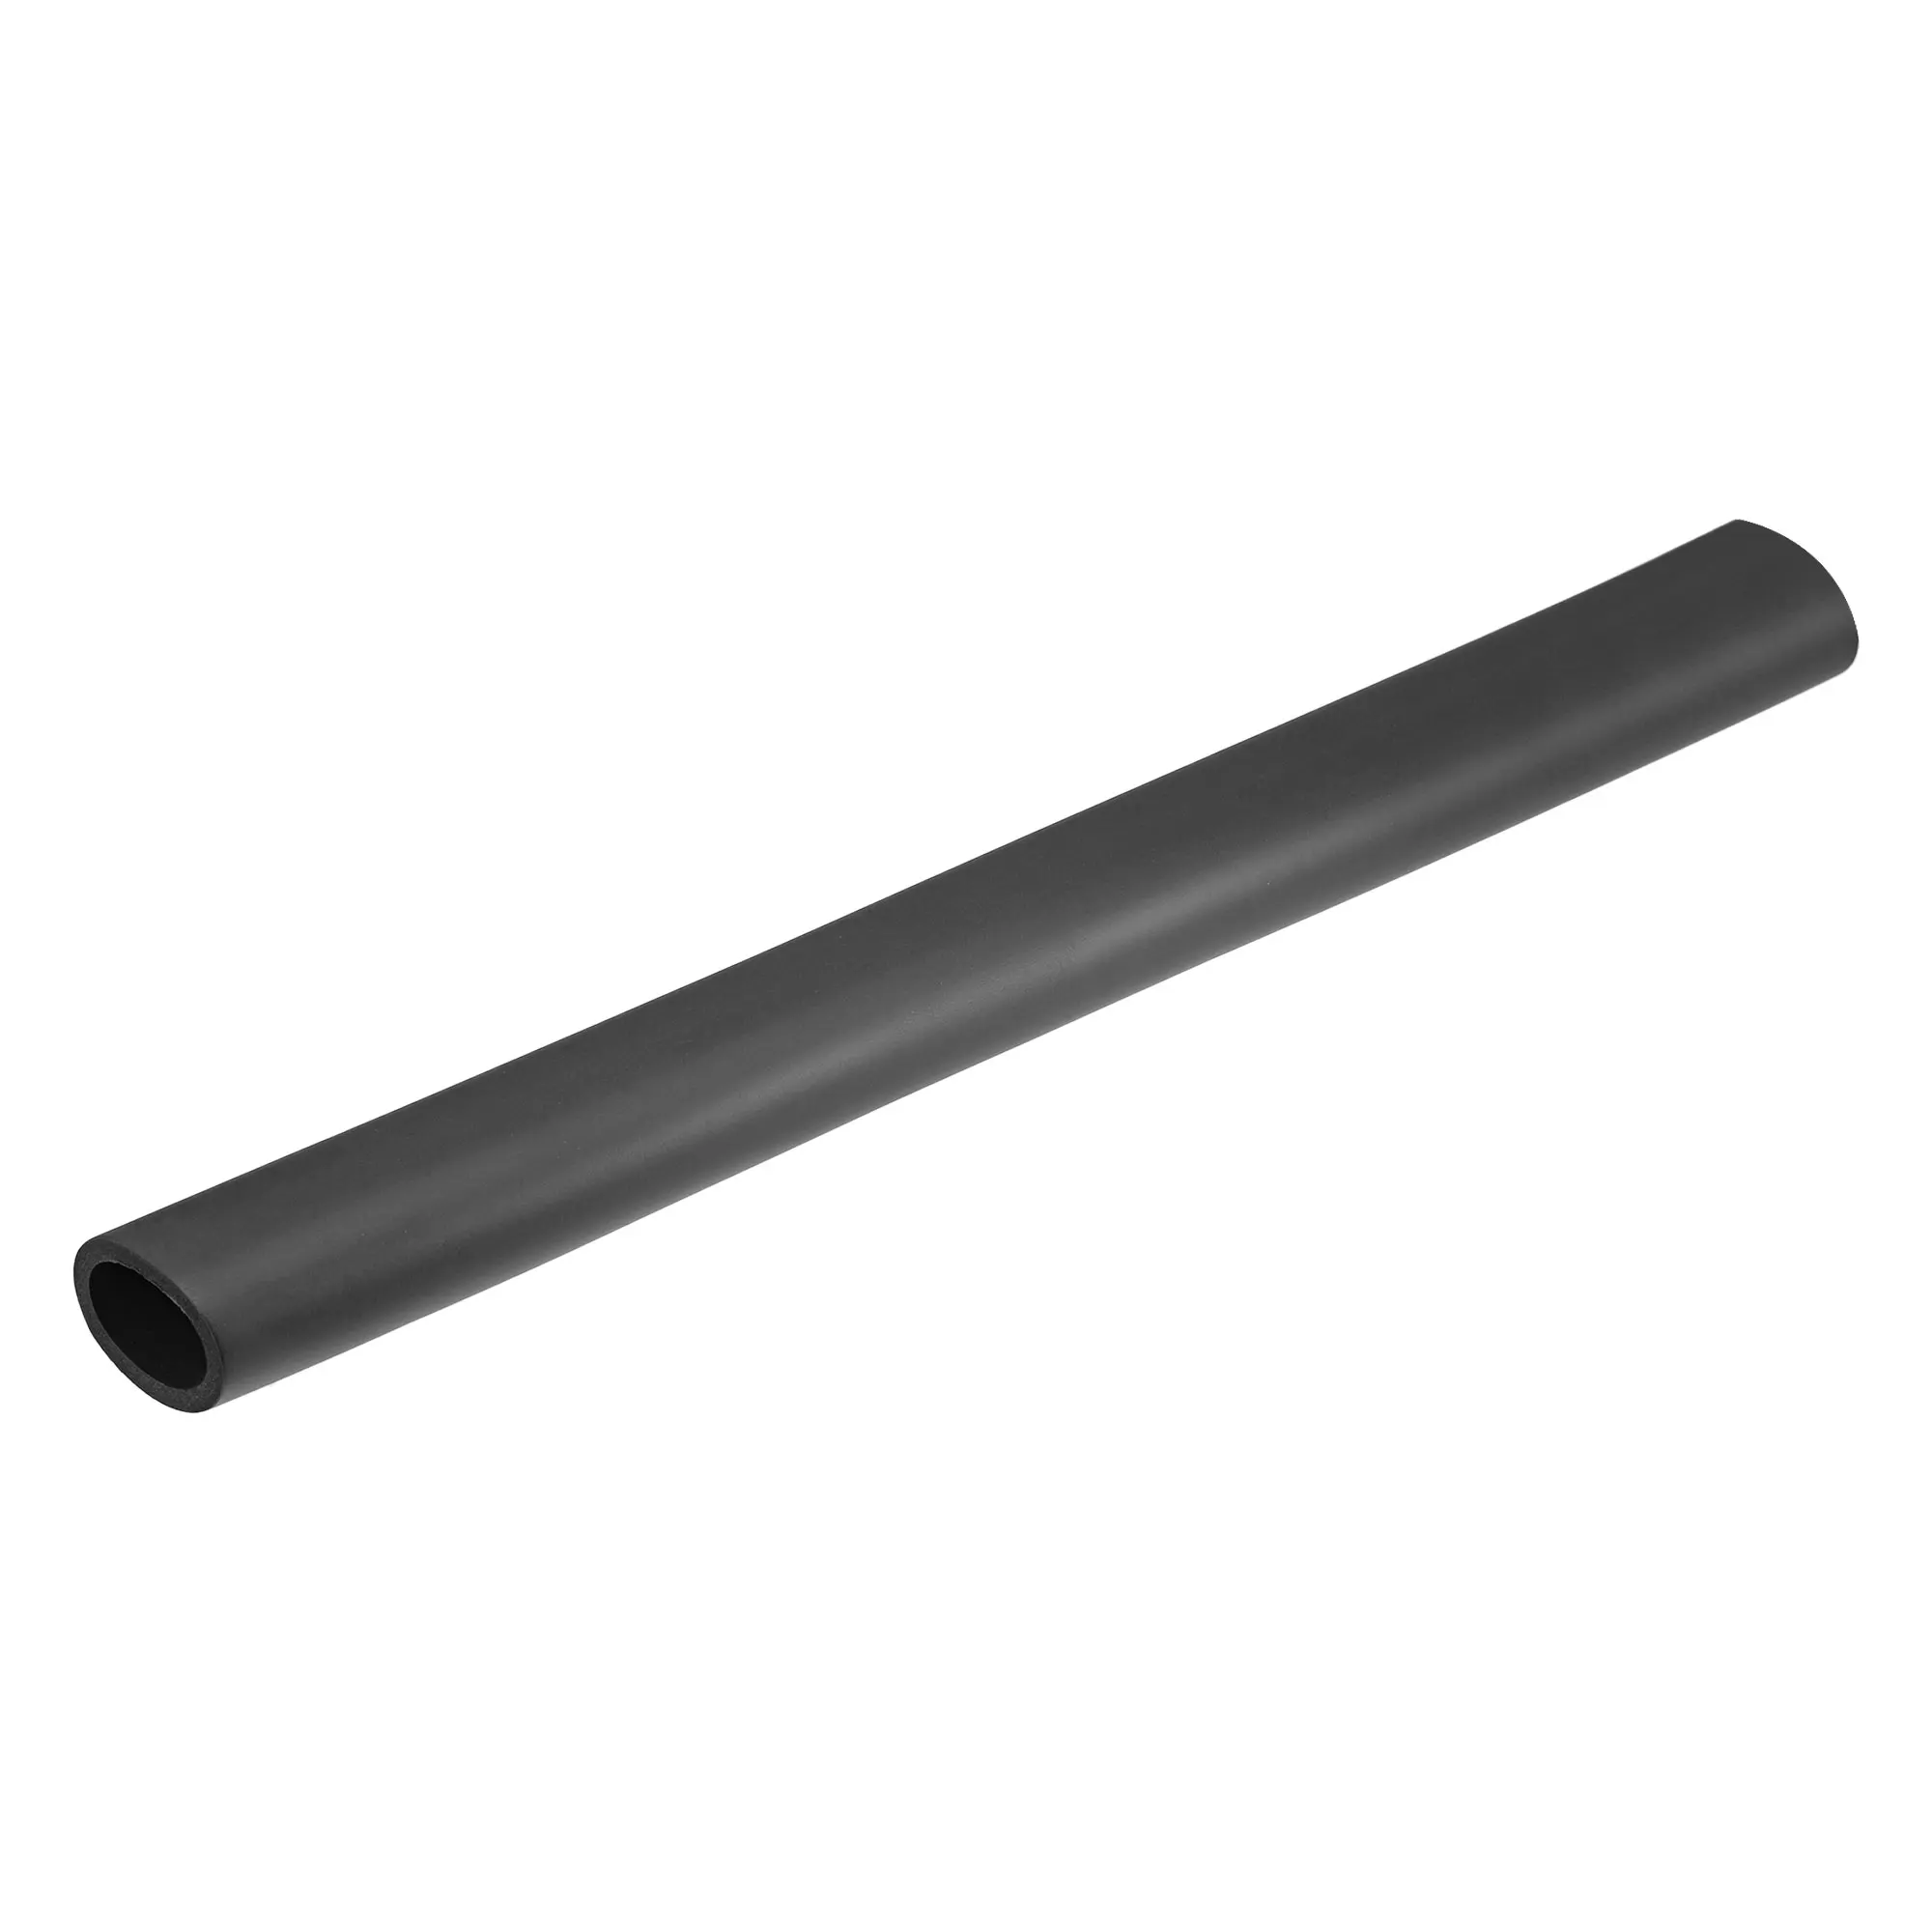 

Uxcell Foam Grip Tubing Handle Grips 1 9/16" ID 9/32" Wall Thick 20" Black Non-slip for Fitness, Tools Handle Support